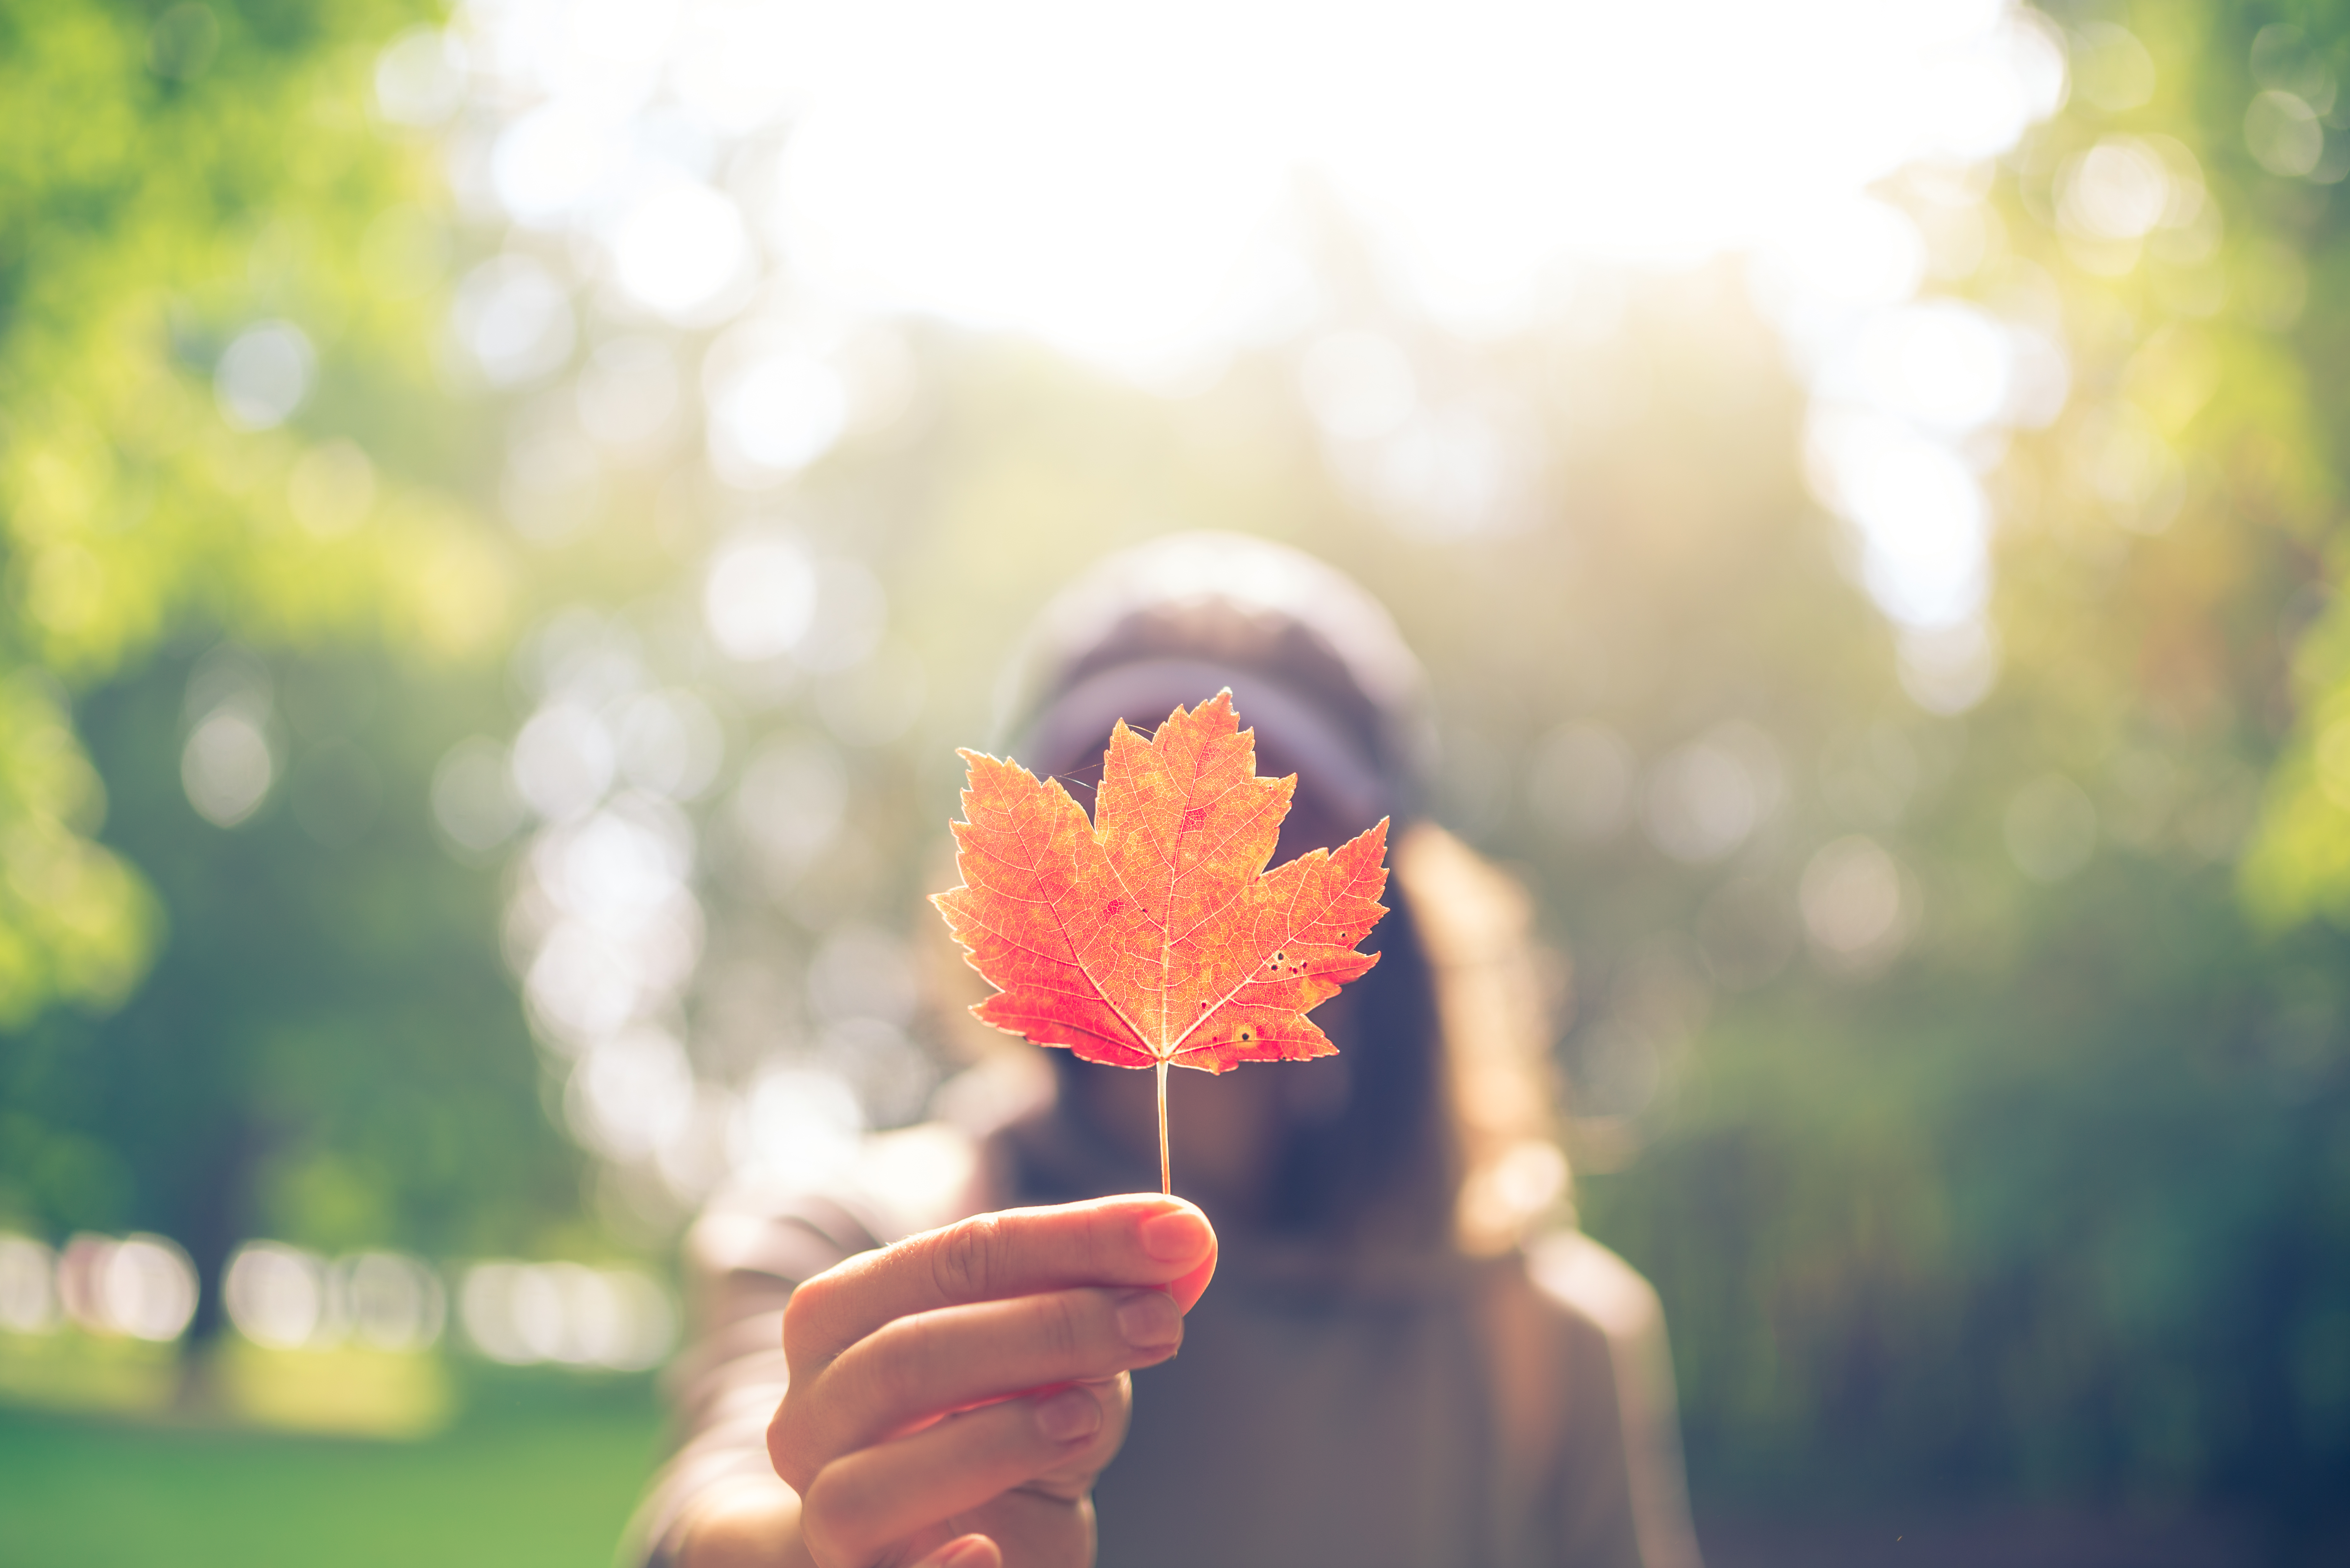 person holding up small red maple leaf standing in front of sun and trees